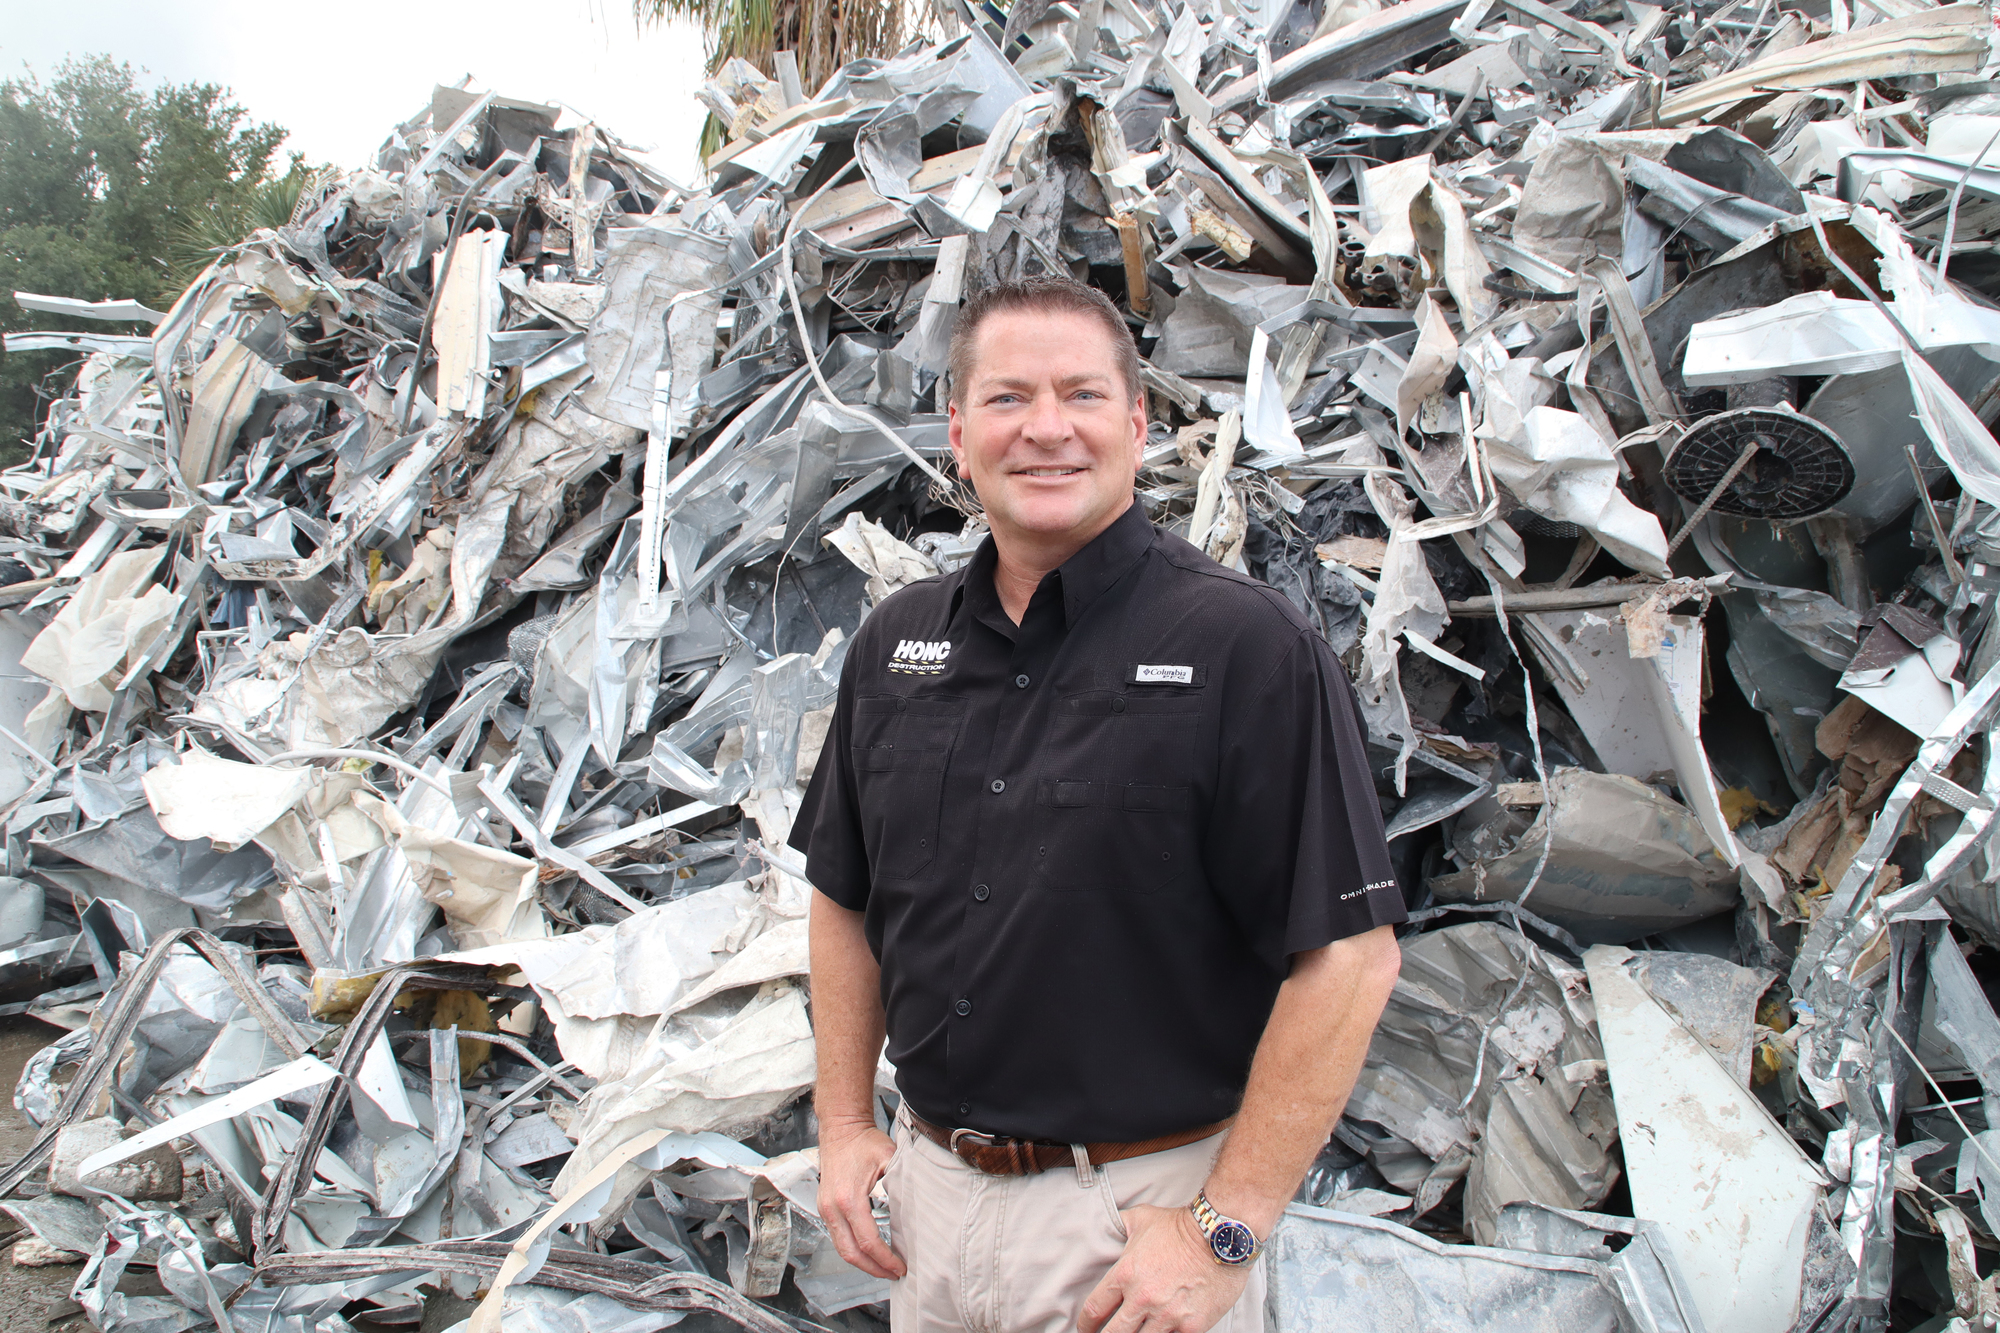 Honc Recycling owner David Mulicka with a pile of treasure, metals being recycled from demolition and construction debris. JimJett.com photo